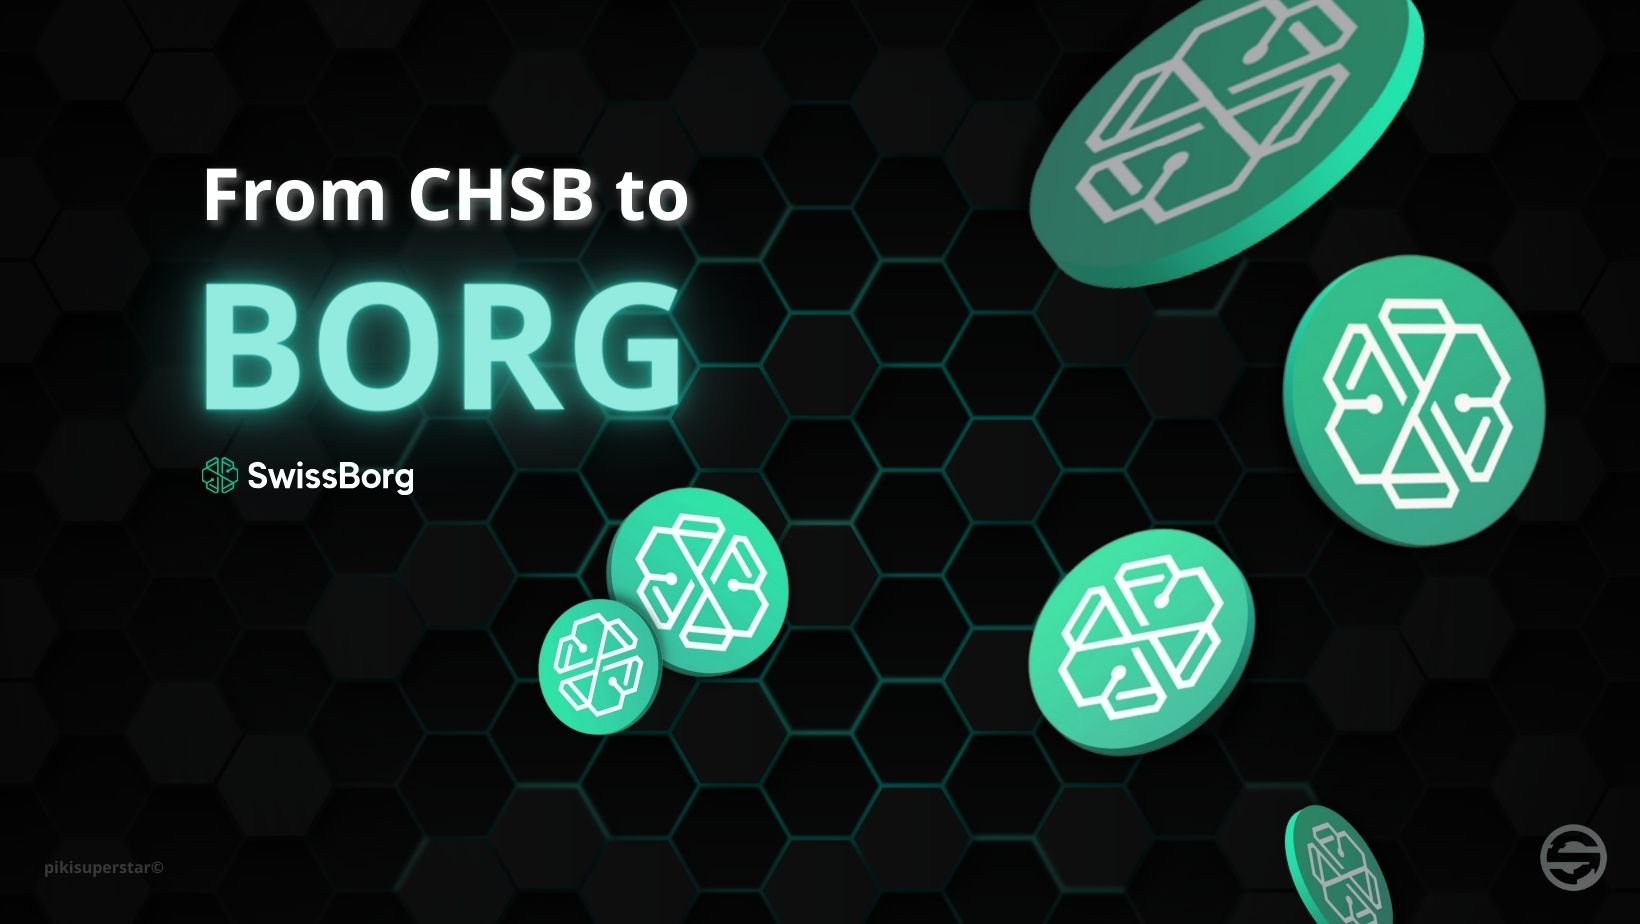 Migration from CHSB to BORG, another step towards DeFi for Swissborg